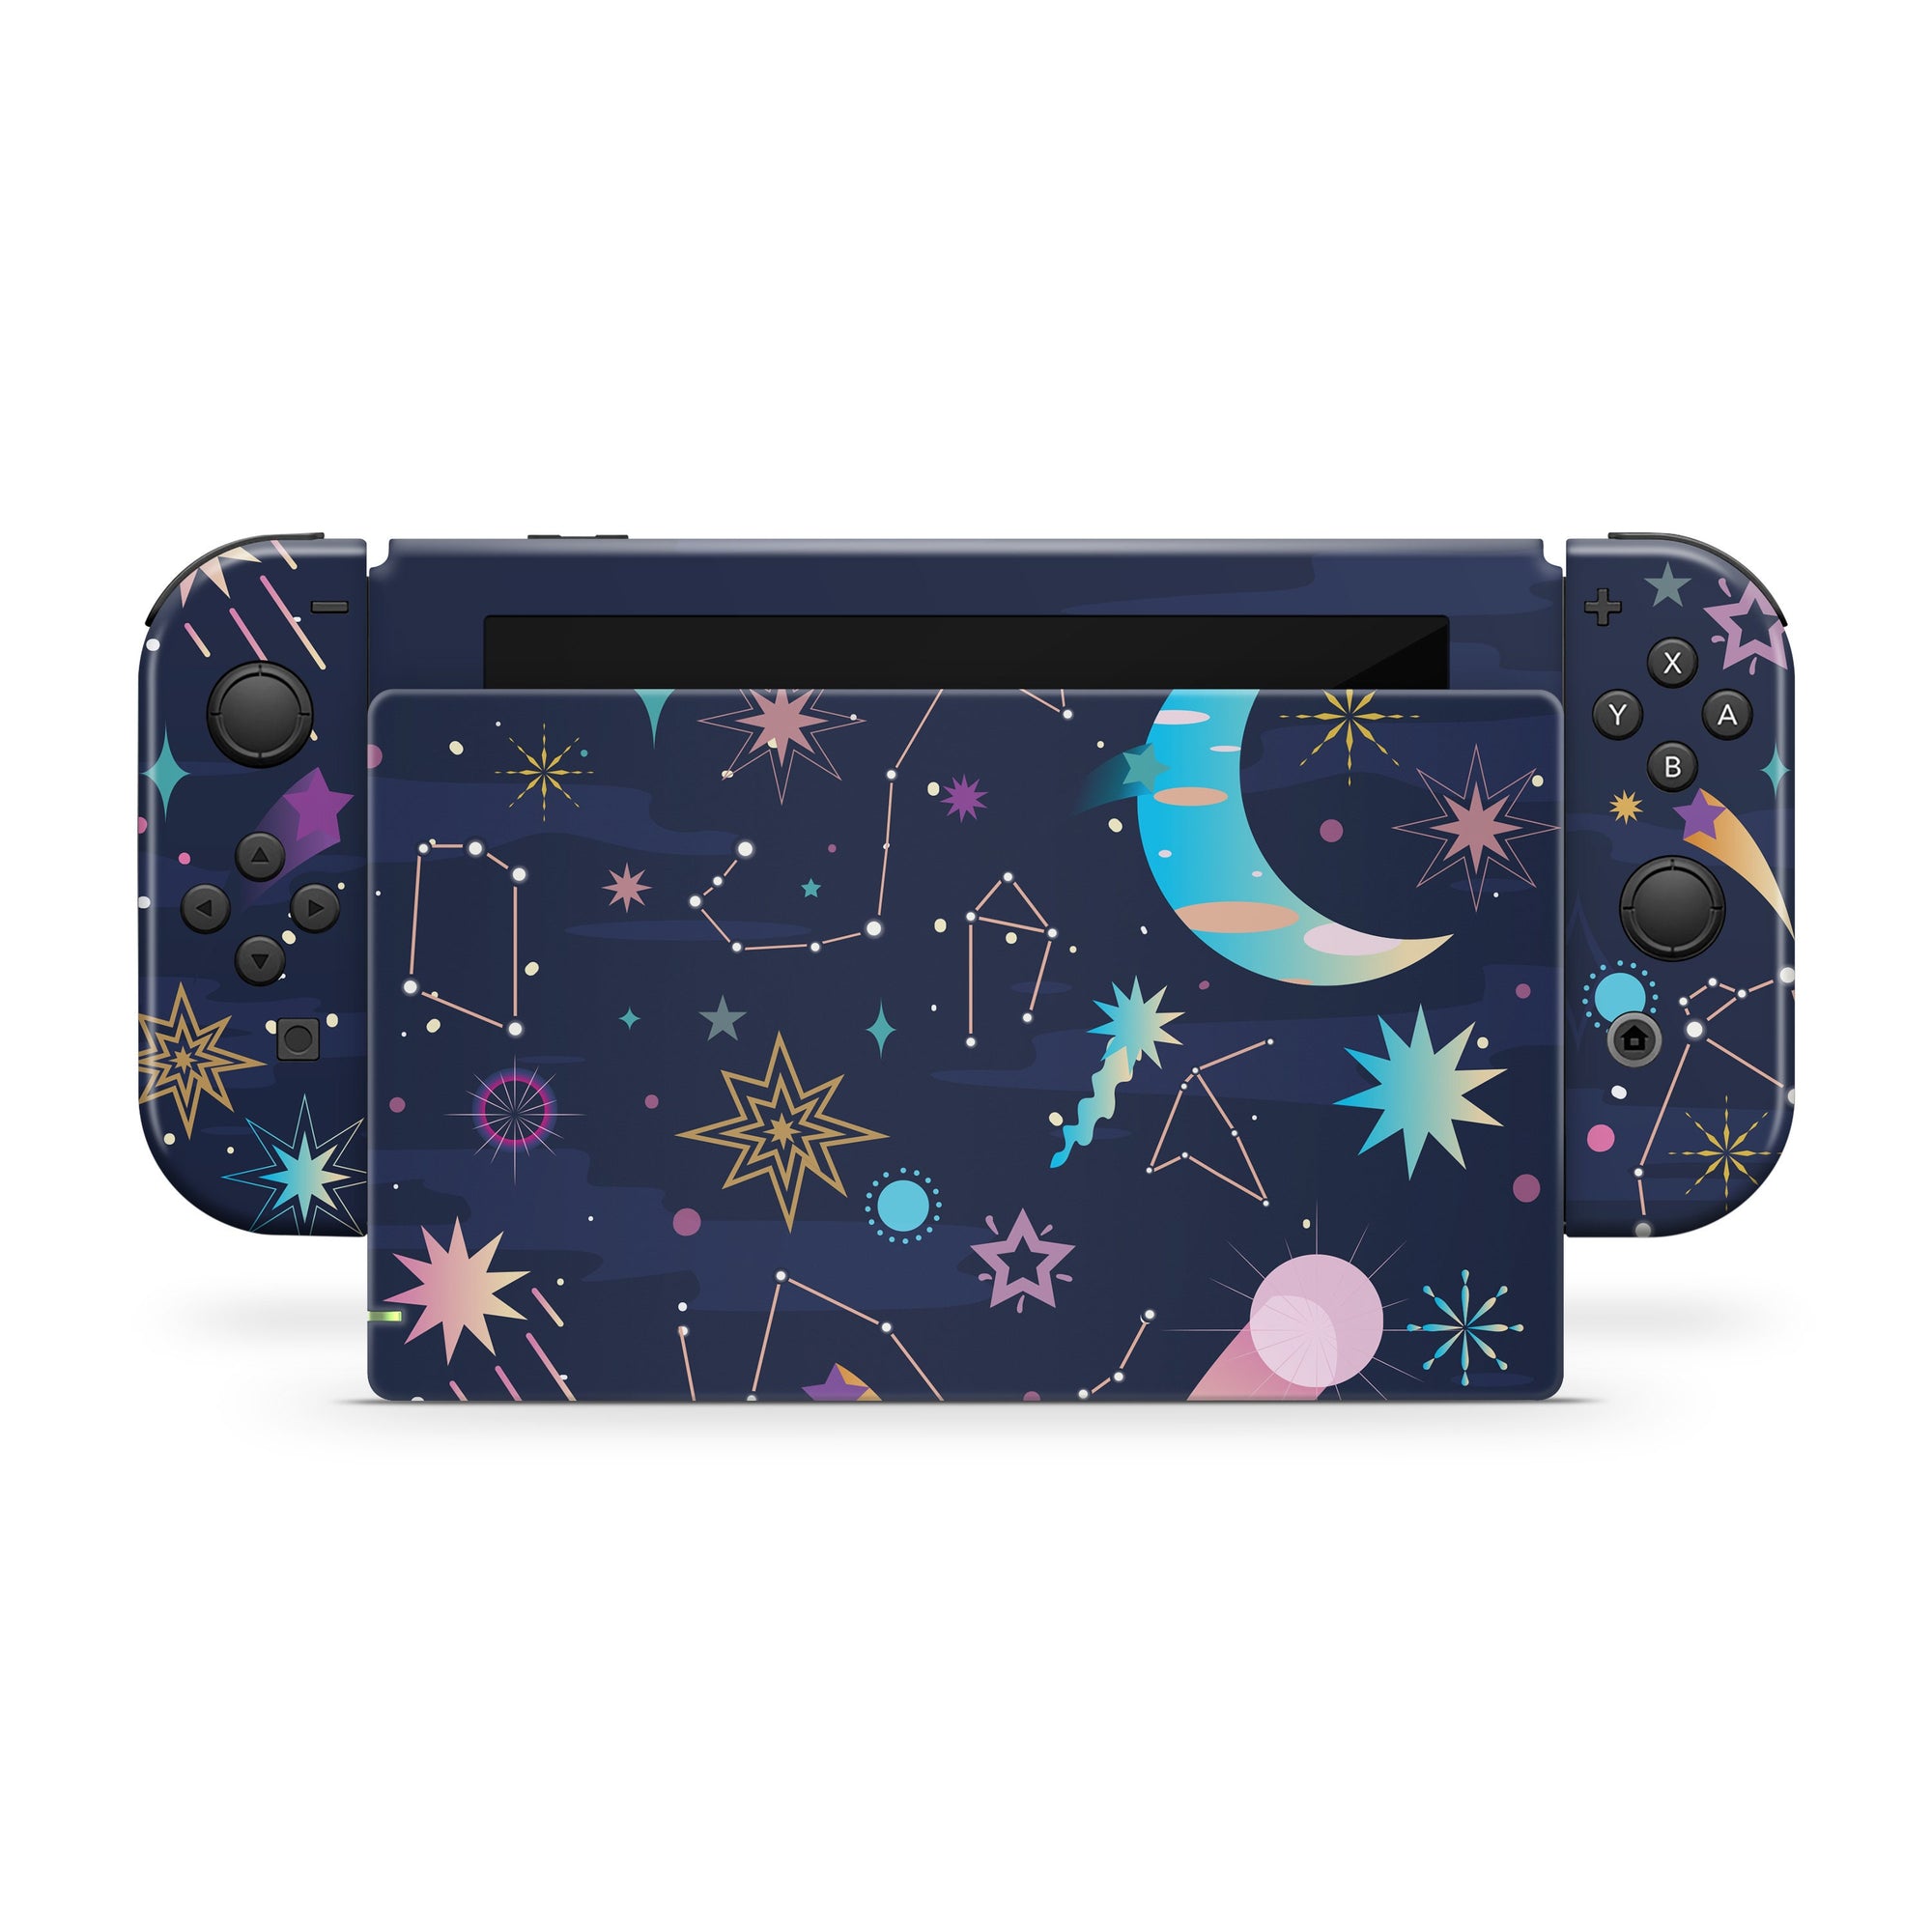 Nintendo switches skin Stars and zodiac, Blue moon switch skin Full cover 3m